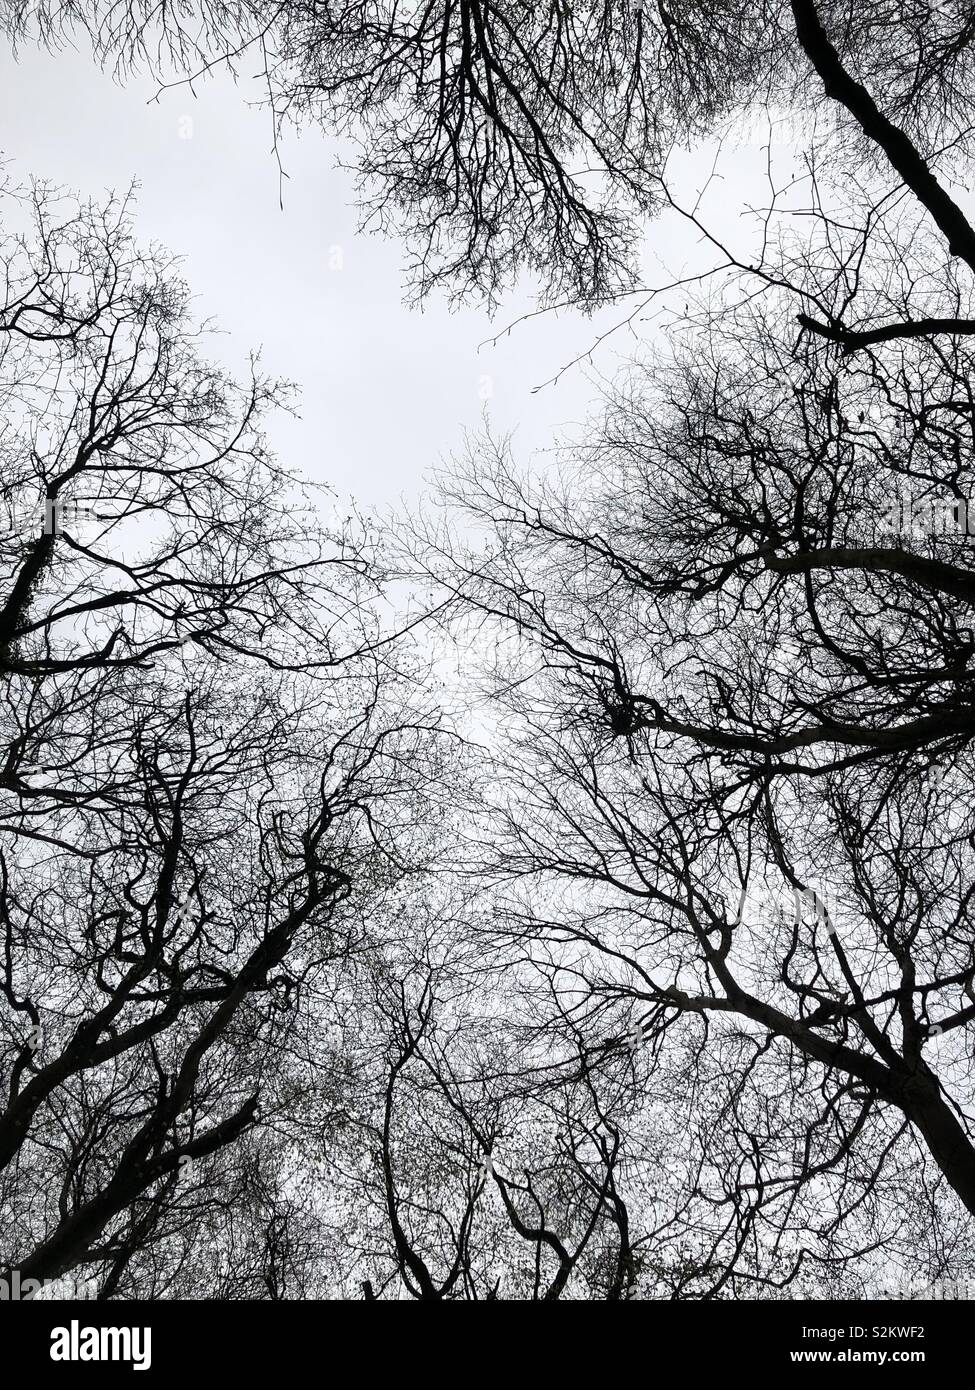 Looking up through lime trees at a grey sky Stock Photo